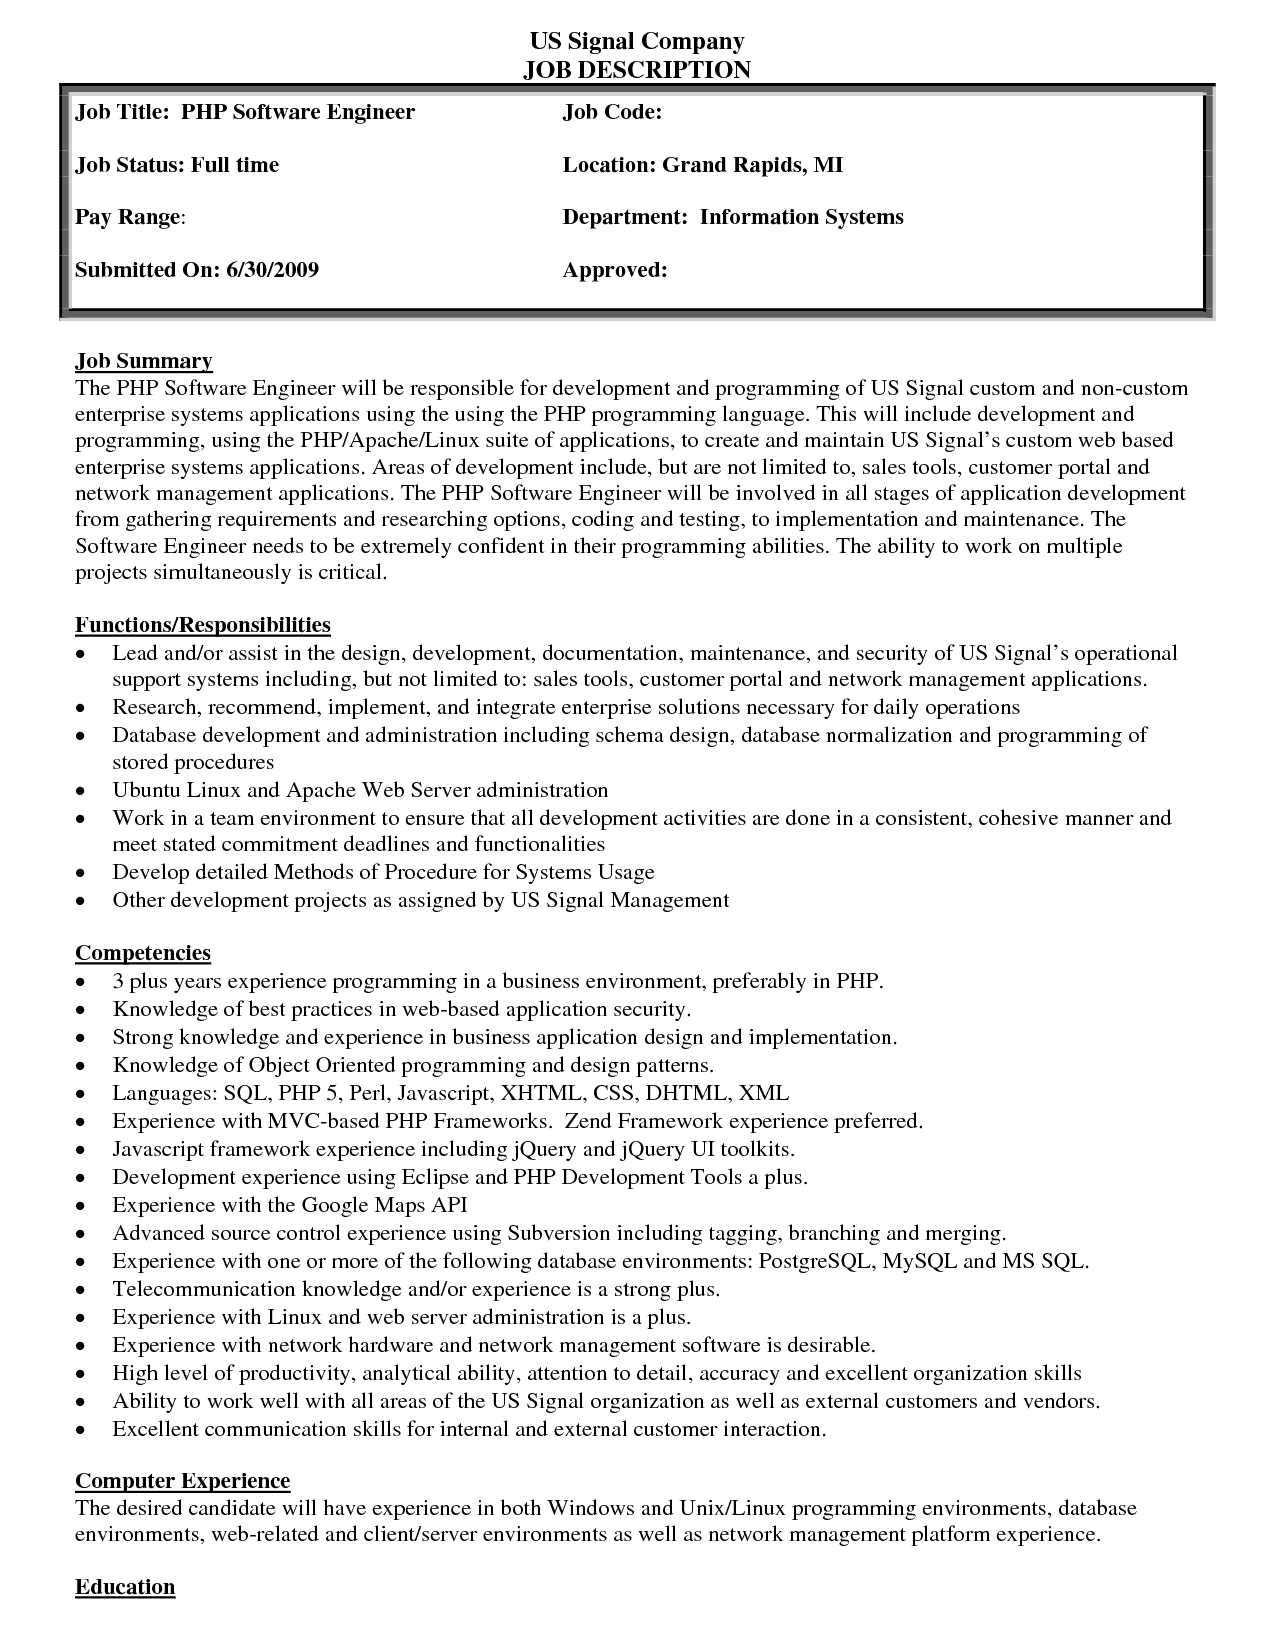 example of description on resume